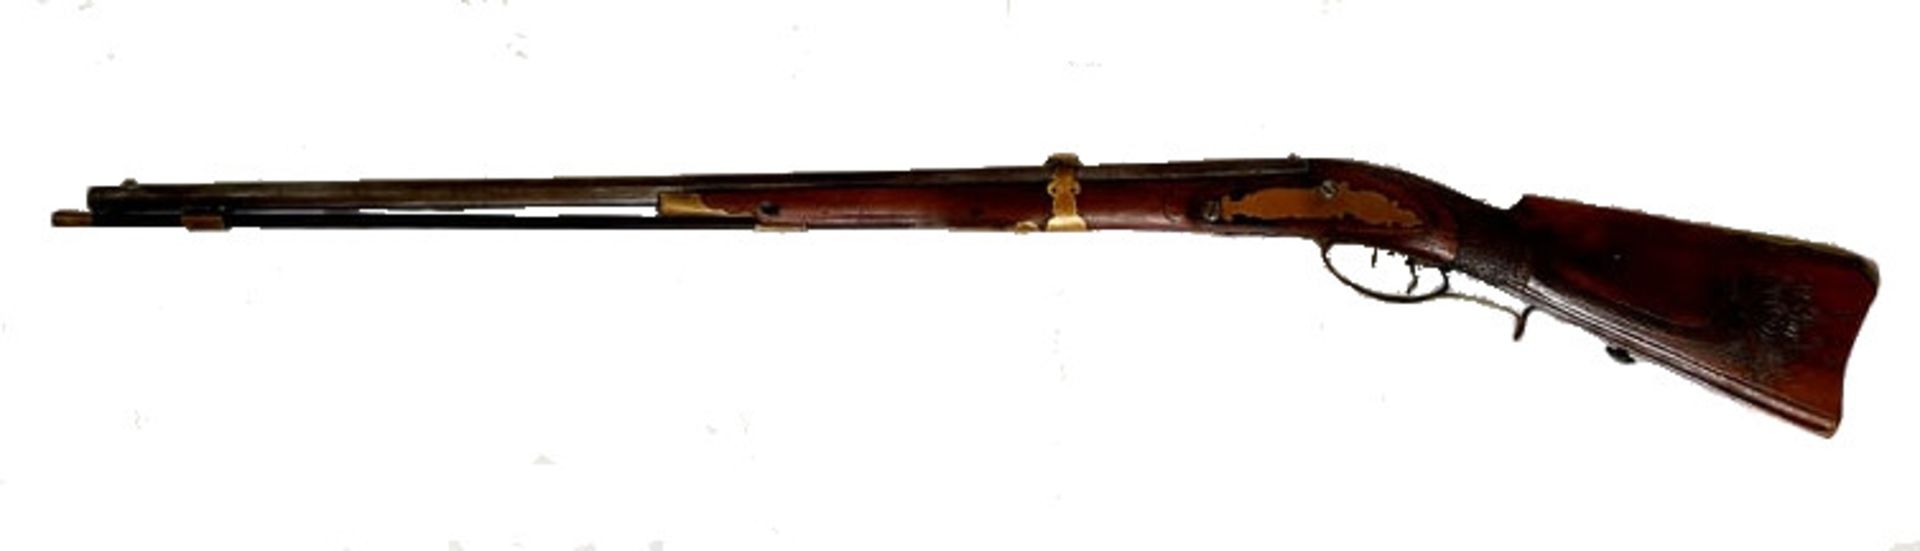 Antique Hunting Rifle